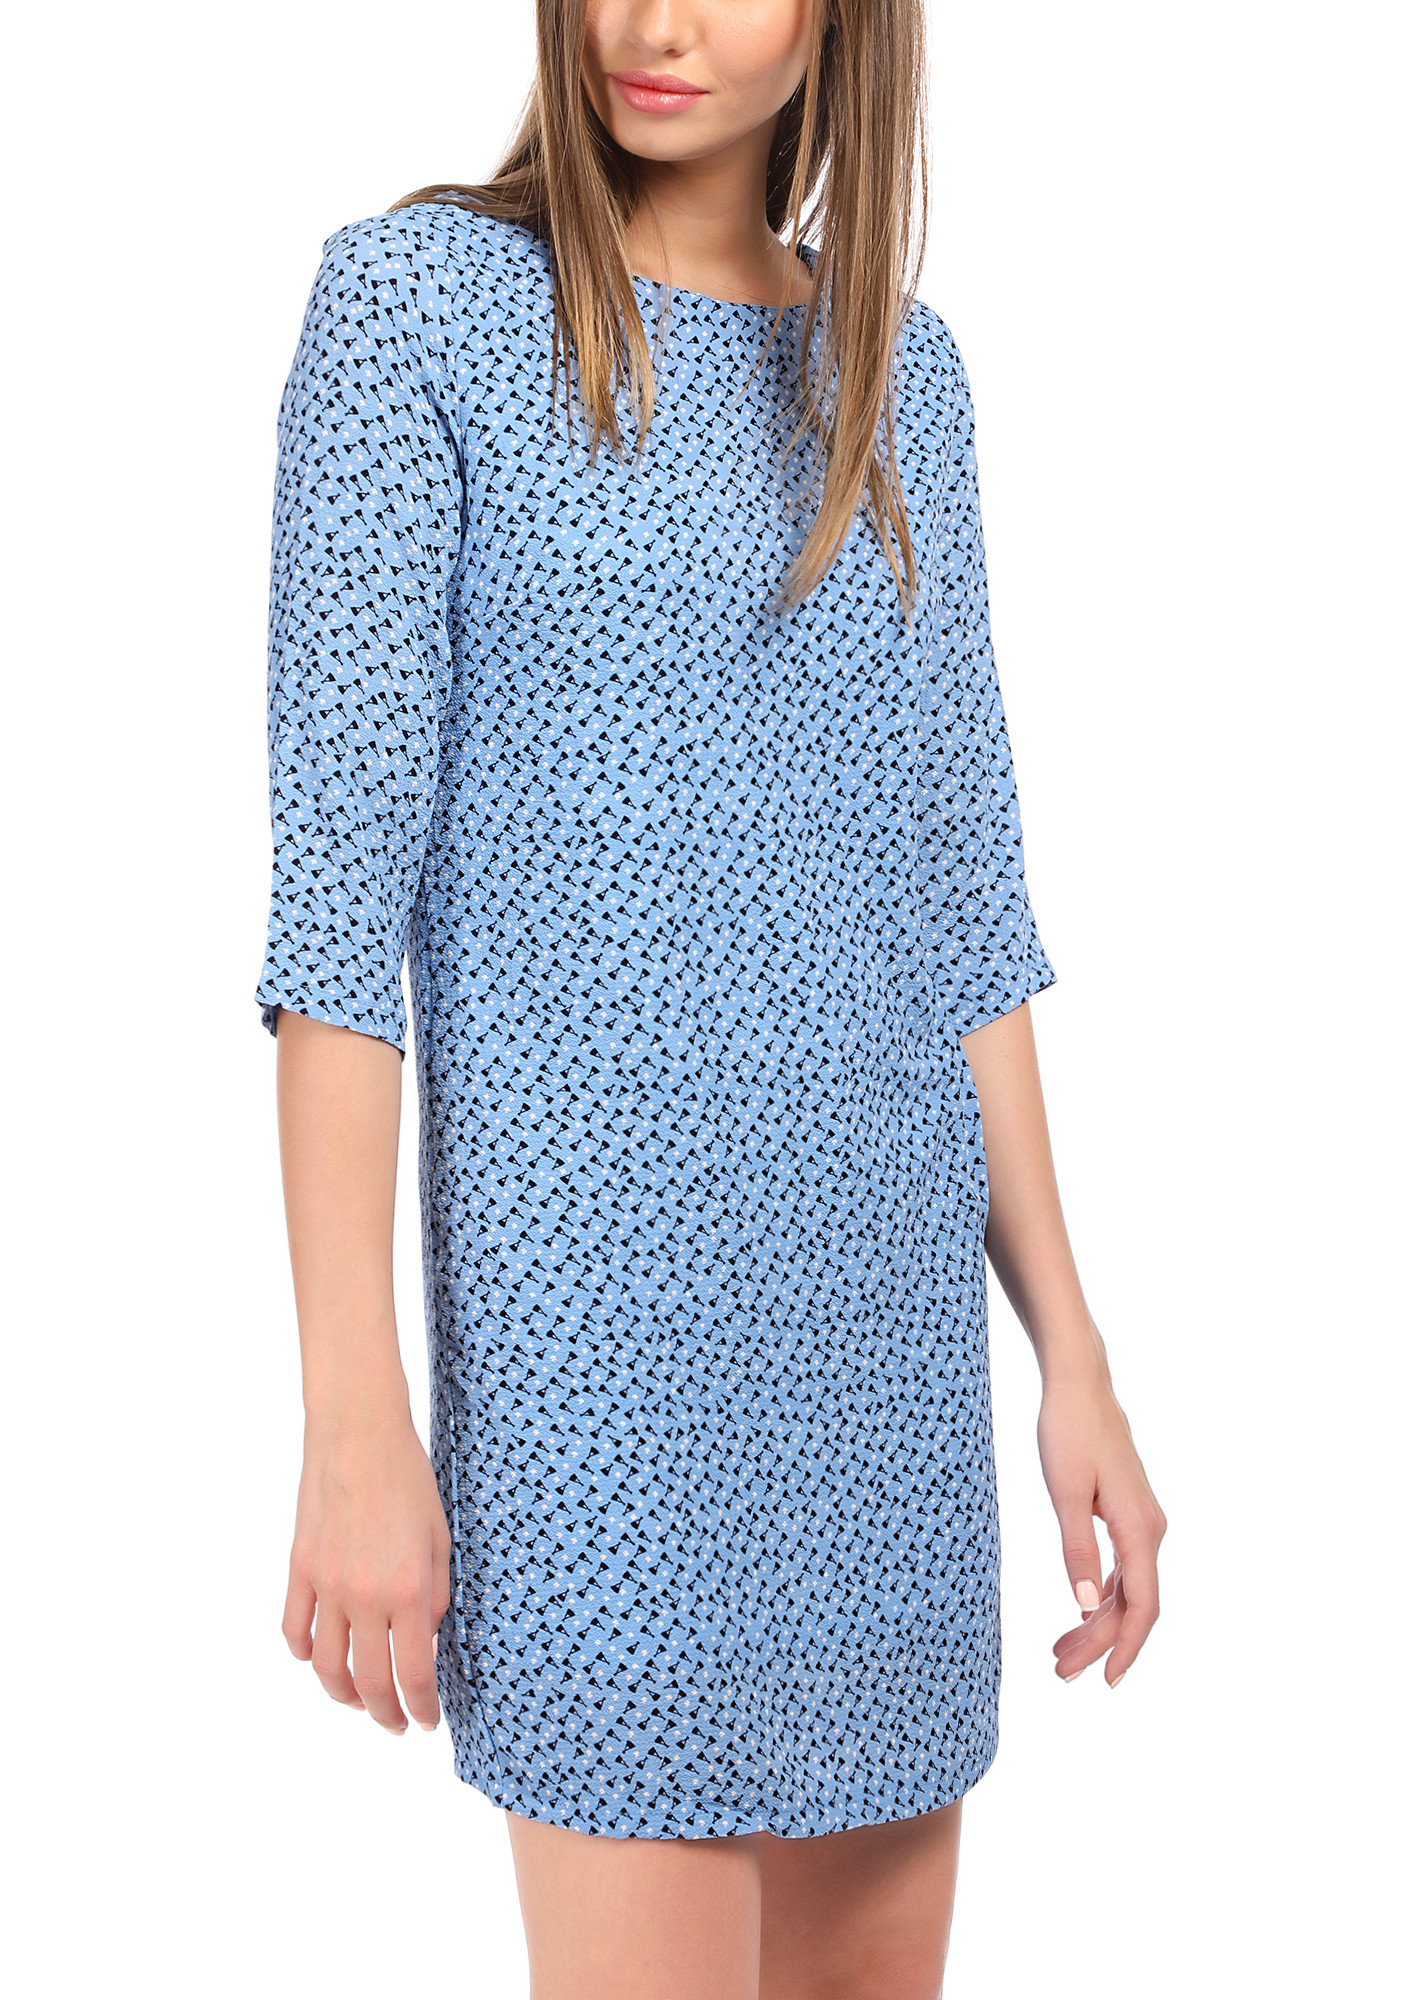 OH SO RELAXED BLUE PRINTED SHIFT DRESS